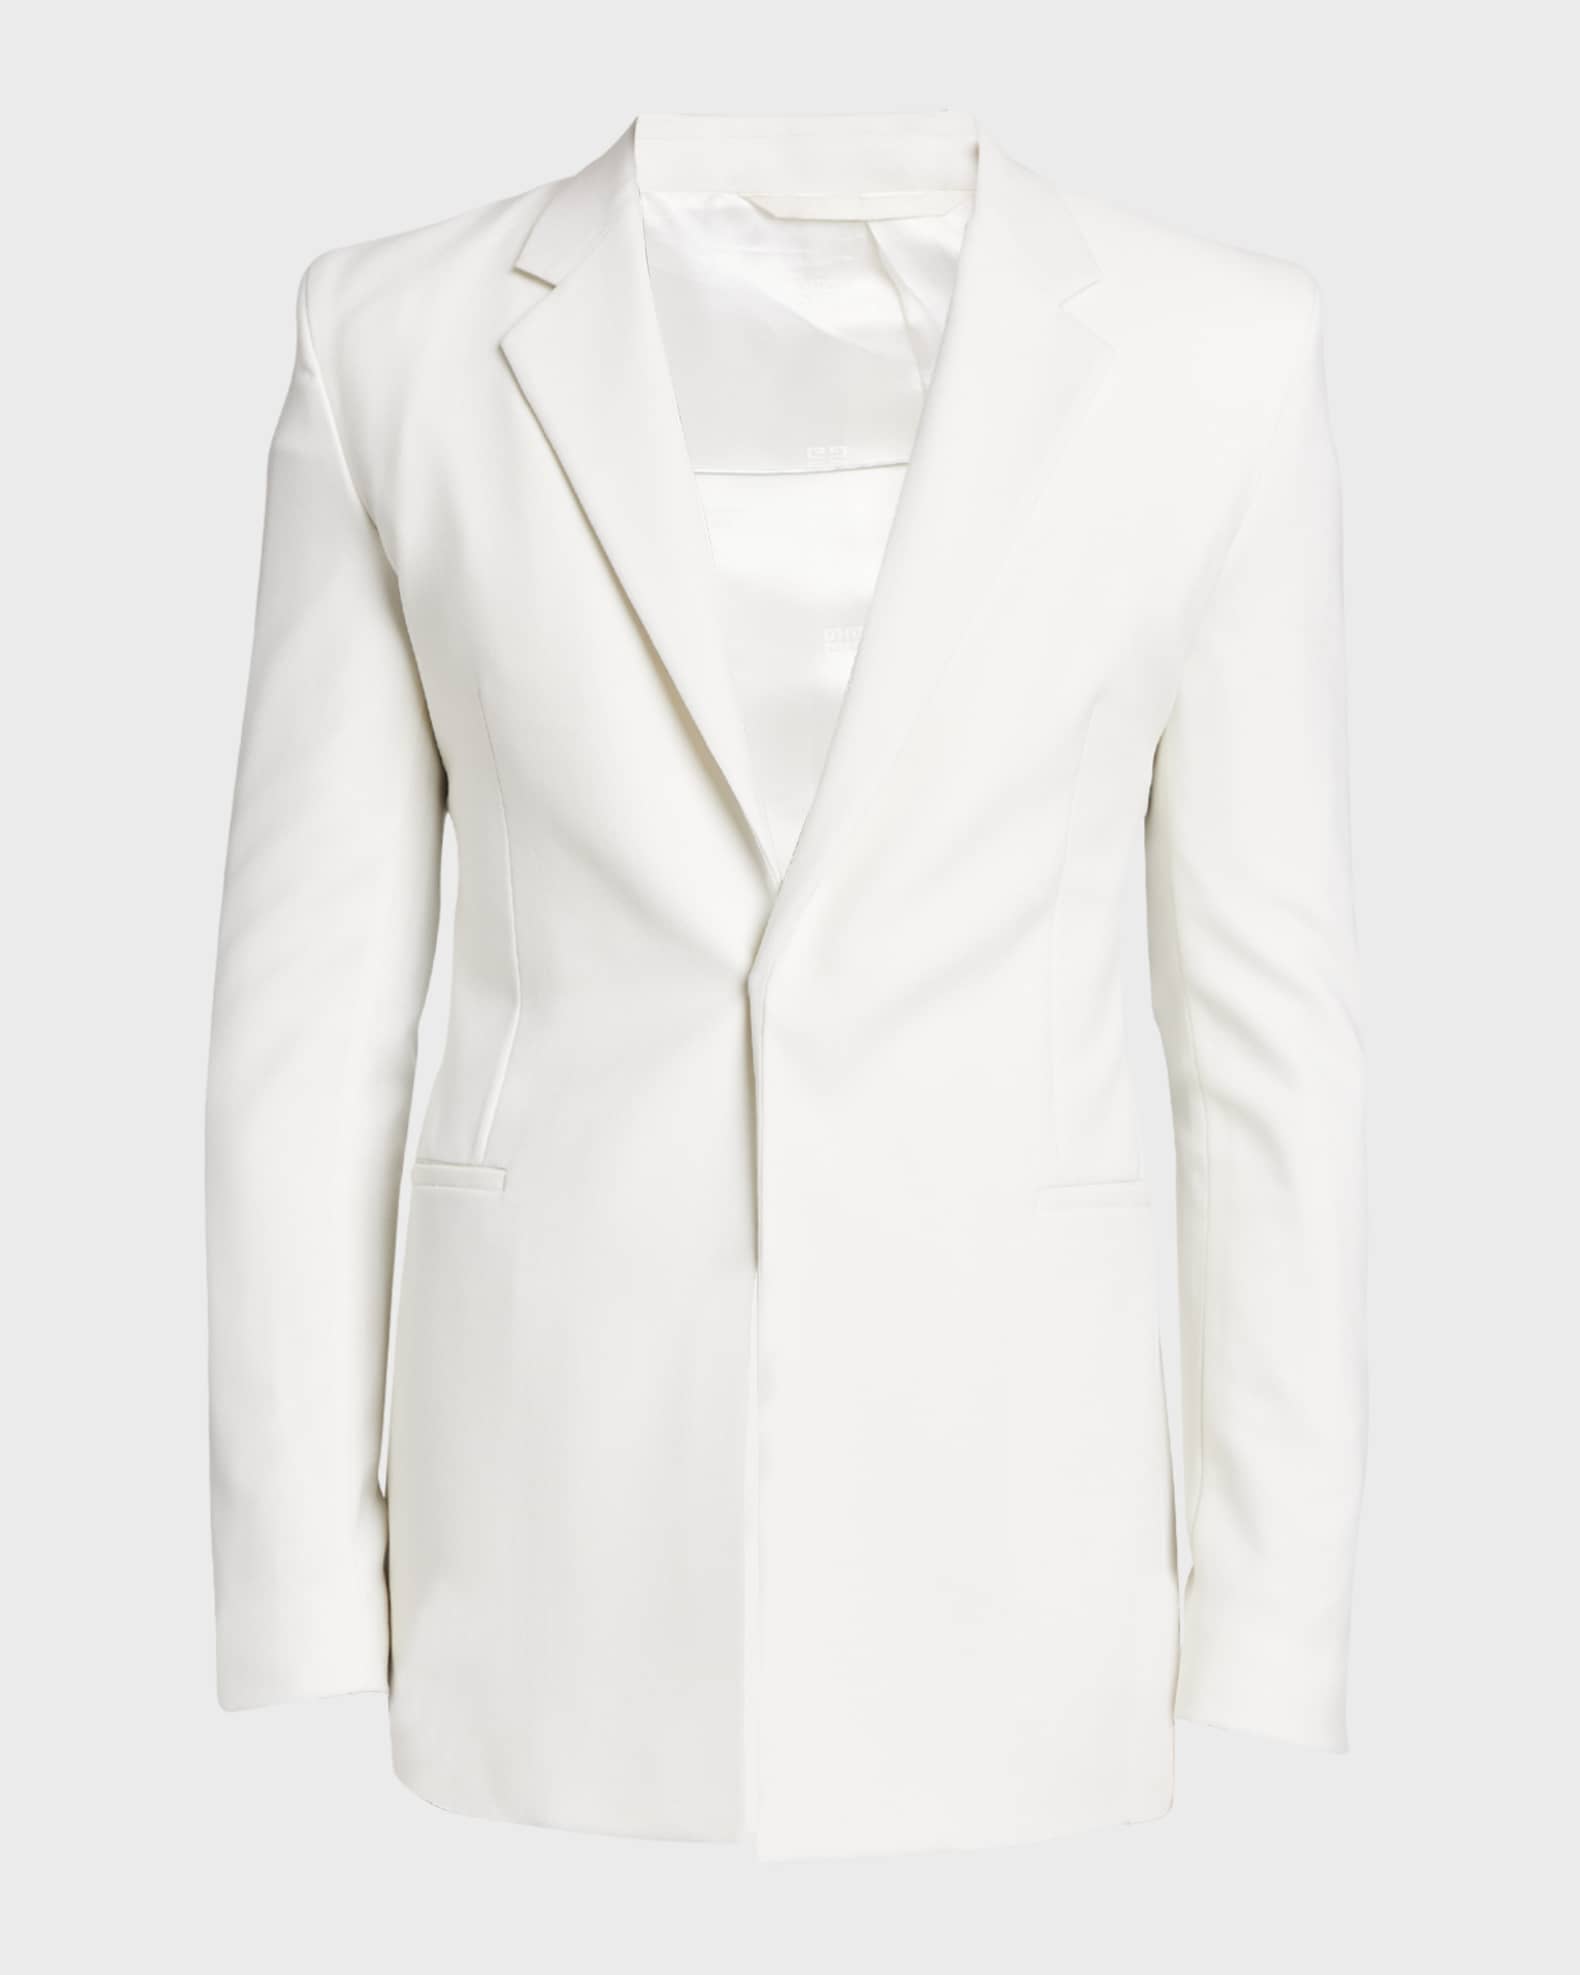 Givenchy Men's Extra-Fitted Dinner Jacket | Neiman Marcus